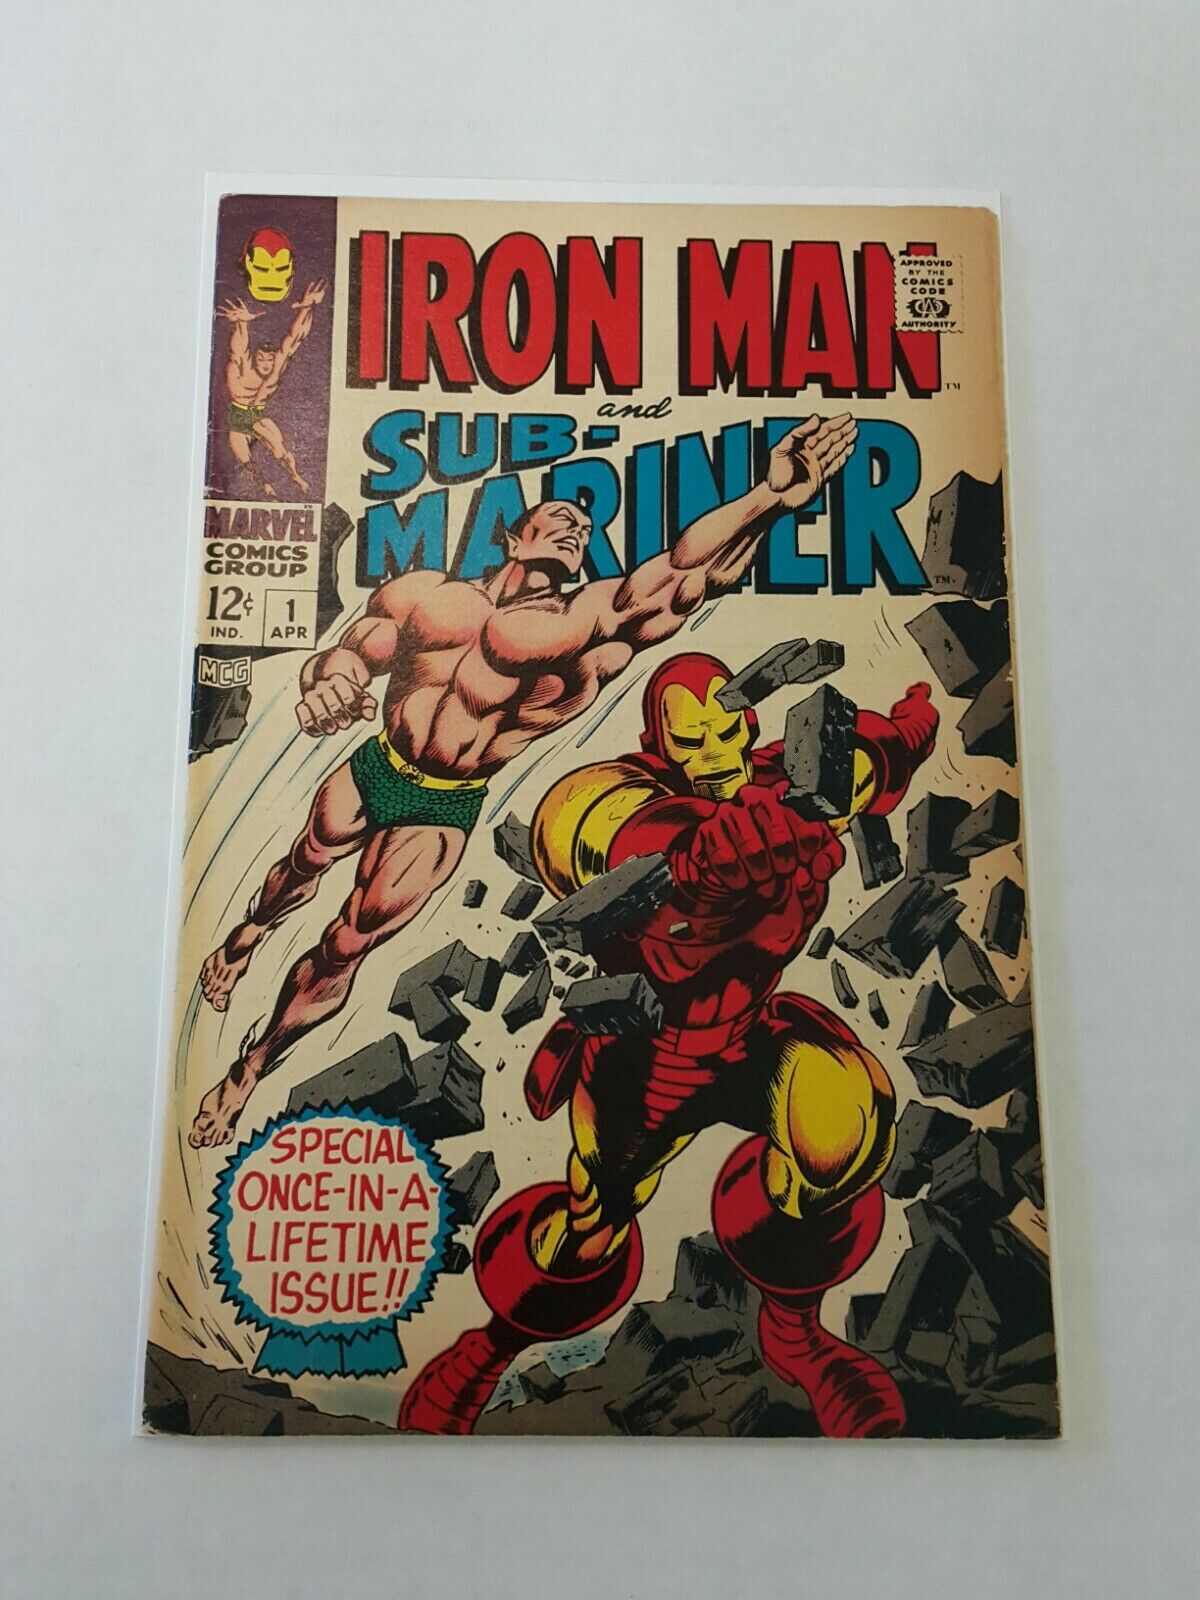 Iron Man and the Sub-Mariner 1, (Marvel, Apr 1968), VG/FN, 1st Print, Silver